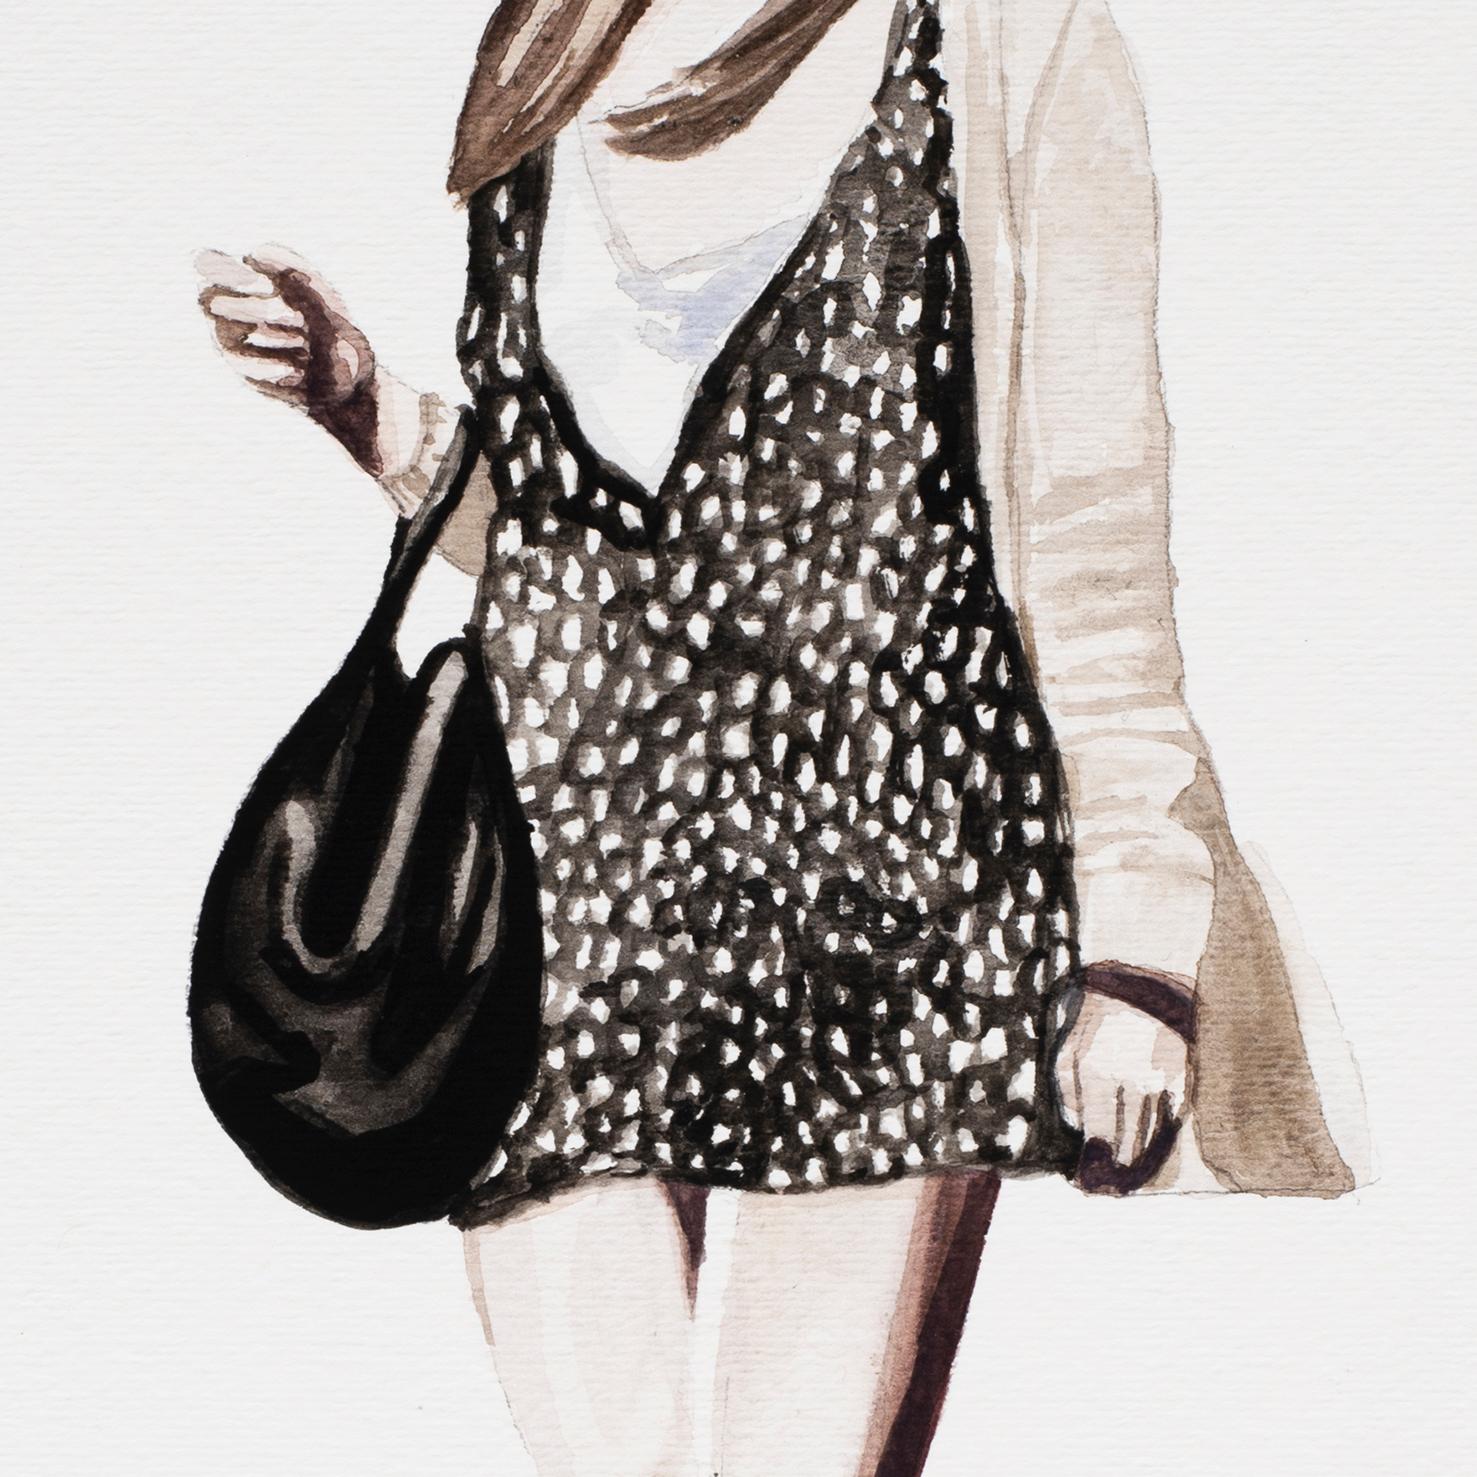 Courtney Incognito 024, Realist painting black and white attire on paper  For Sale 1